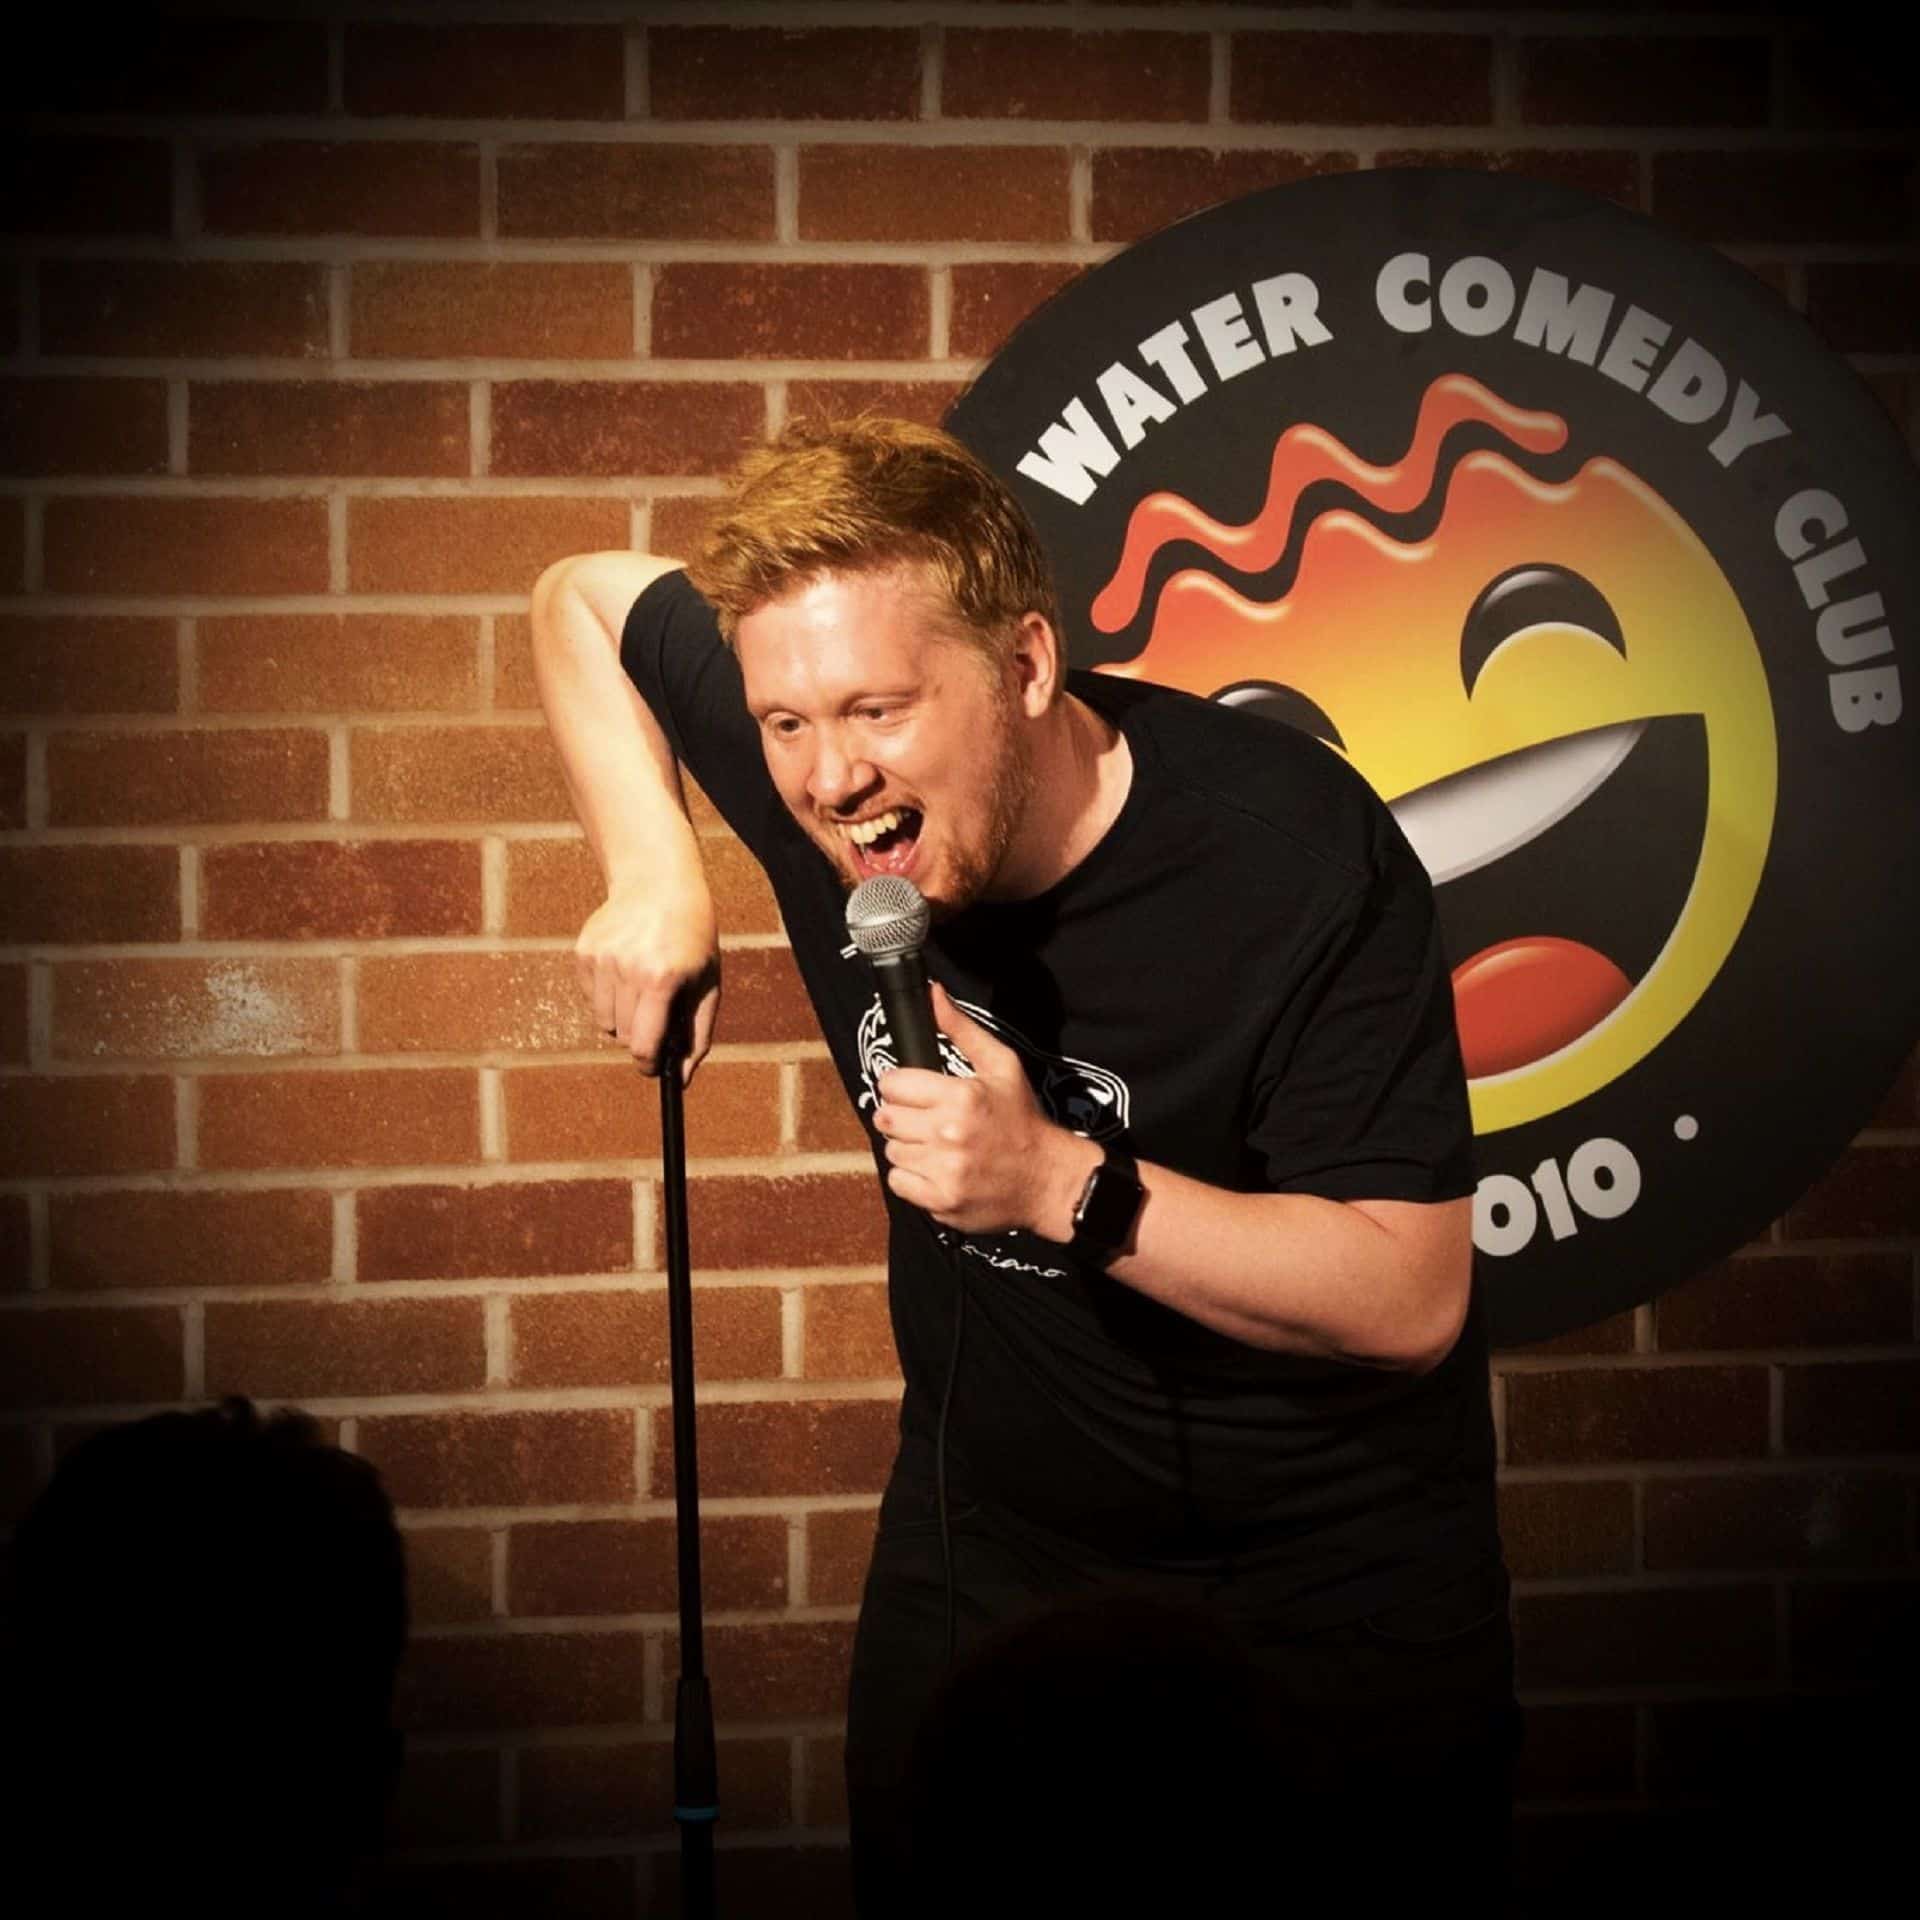 Hot Water Comedy Club - Manchester in UK